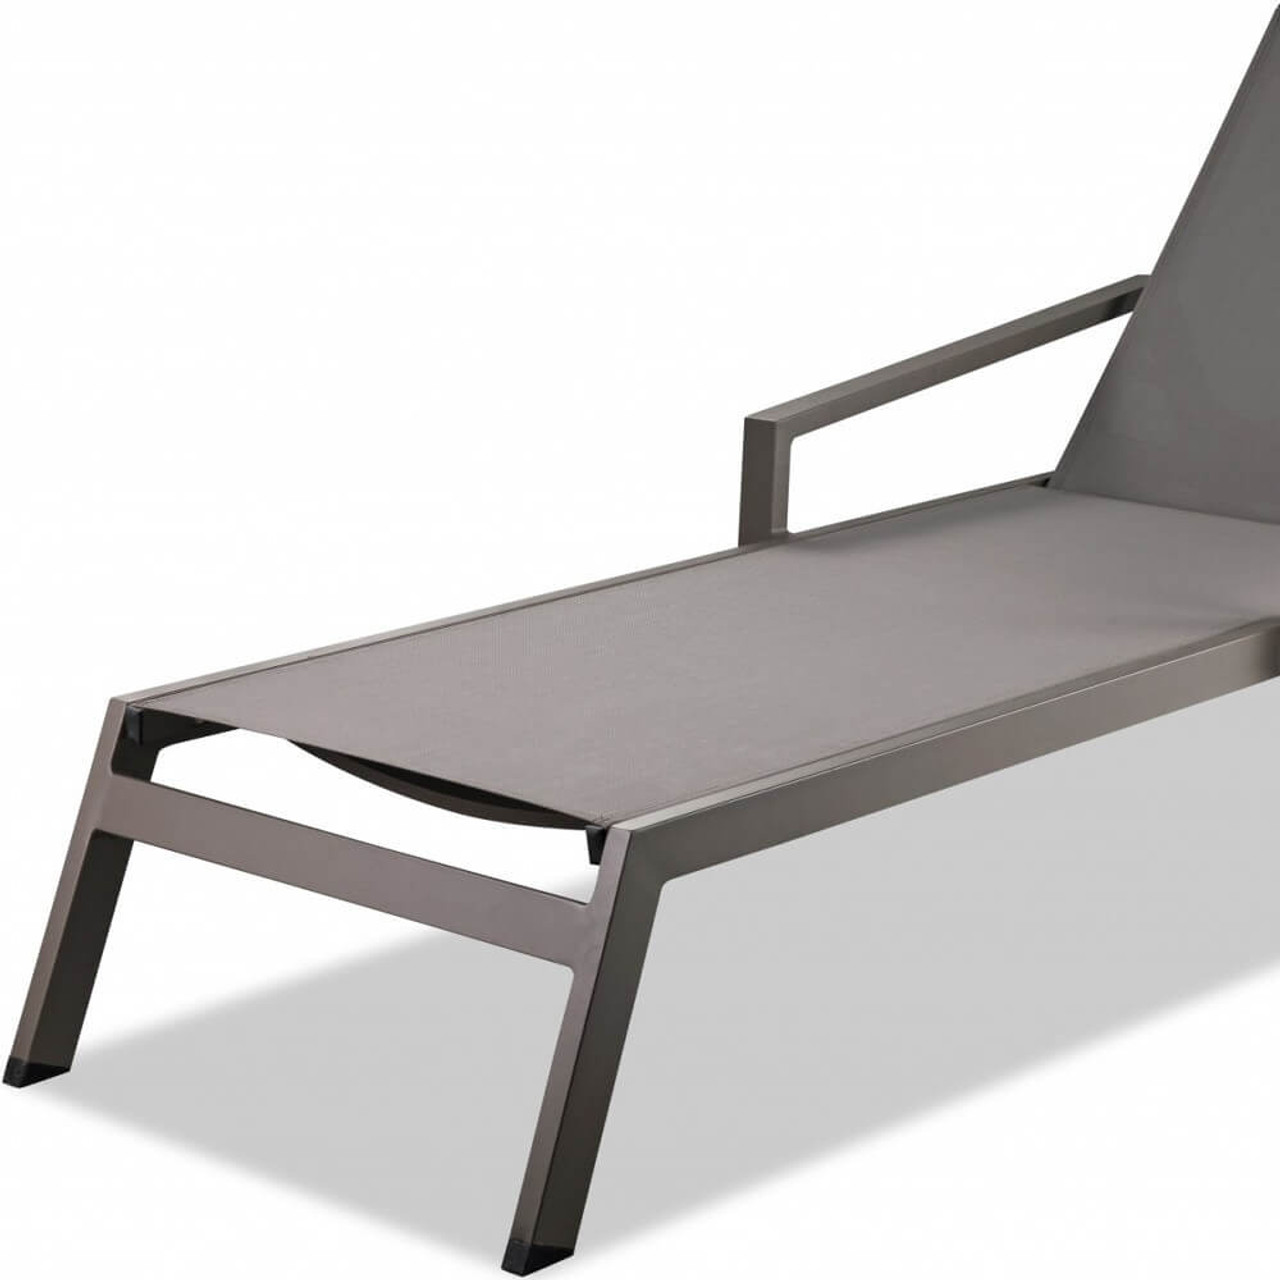 Set Of 2 Taupe Modern Aluminum Chaise Lounges